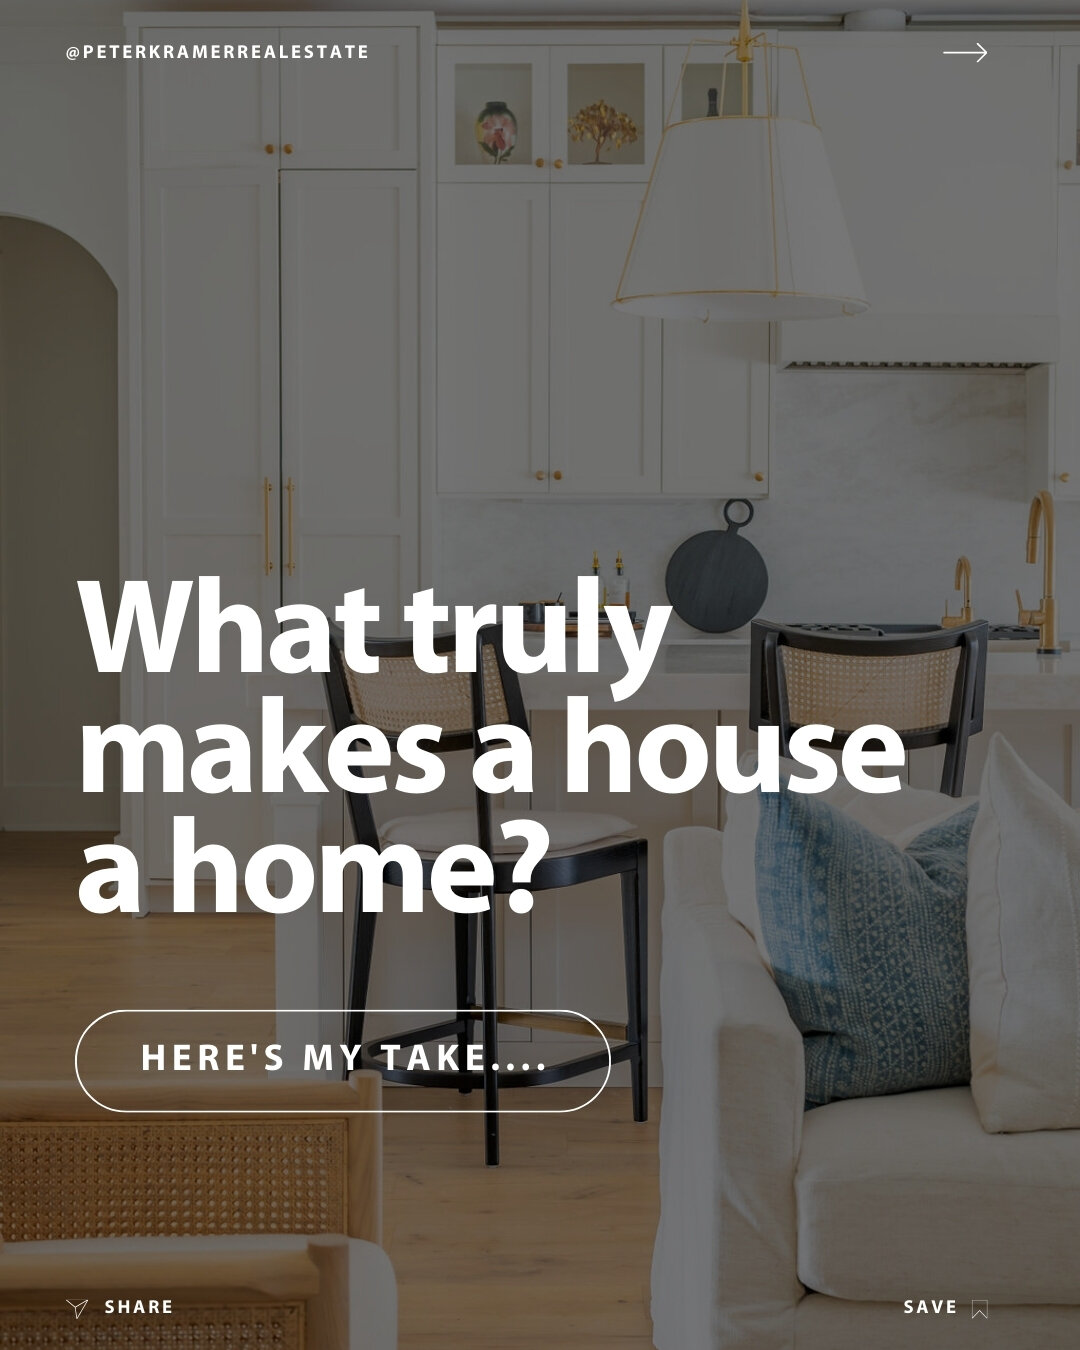 Have you ever wondered what ACTUALLY makes a house a home?? 

As an agent, I've had the privilege of helping many individuals and families find their perfect homes. 

Gathering data from my lovely clients, here's what I've concluded makes a house fee